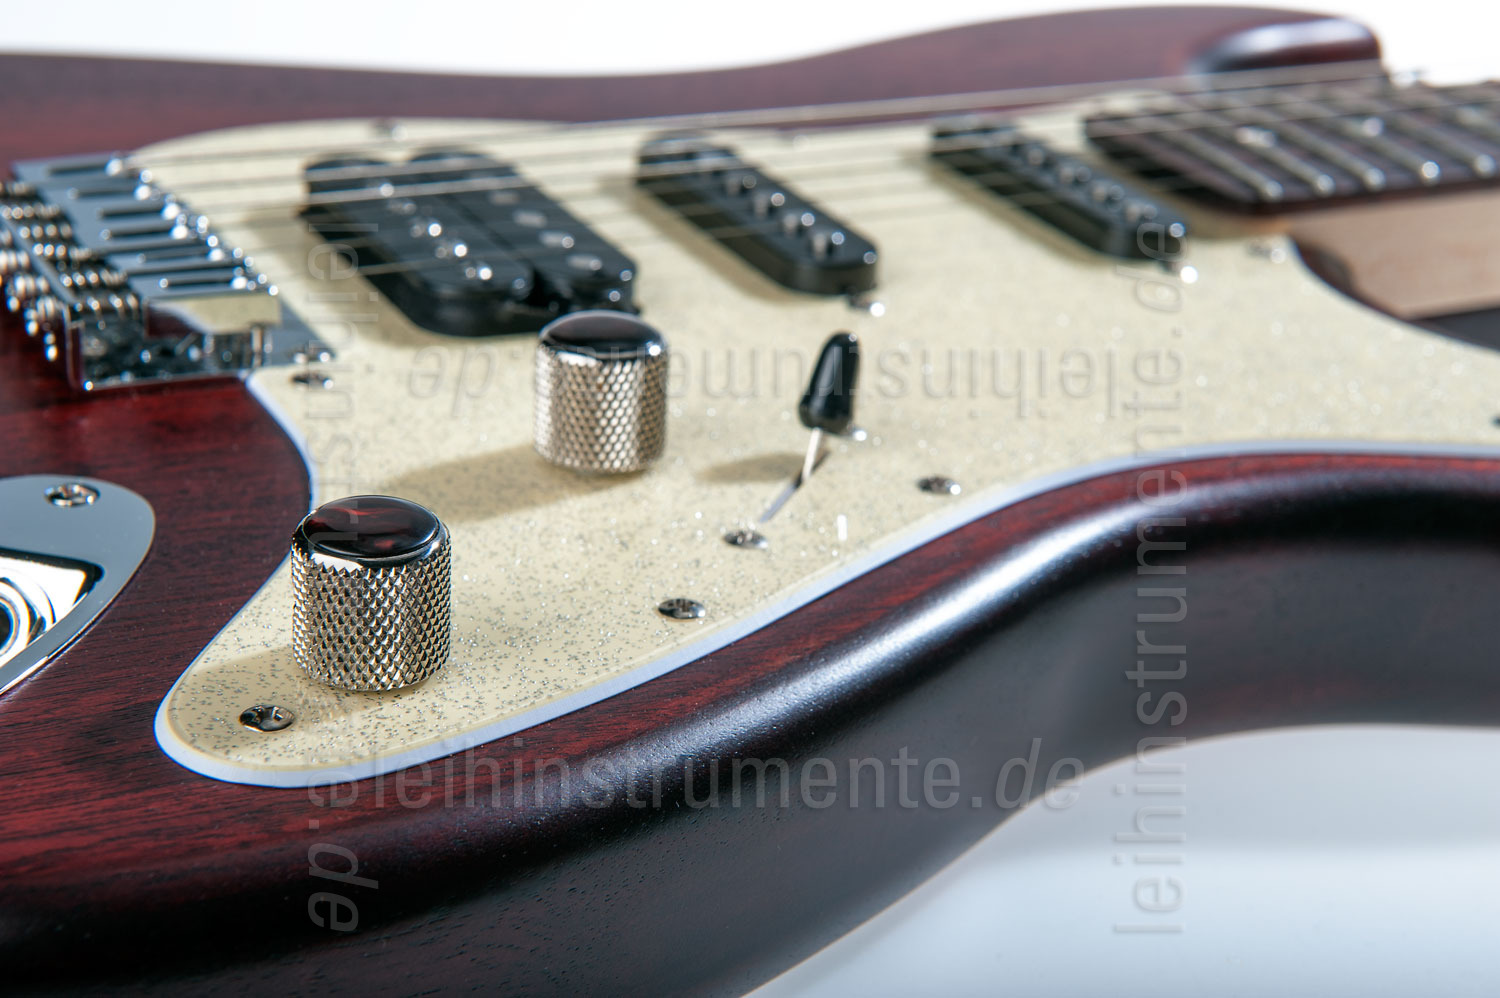 to article description / price Electric Guitar BERSTECHER Old Whisky (Goldsmith edition) + hard case - made in Germany